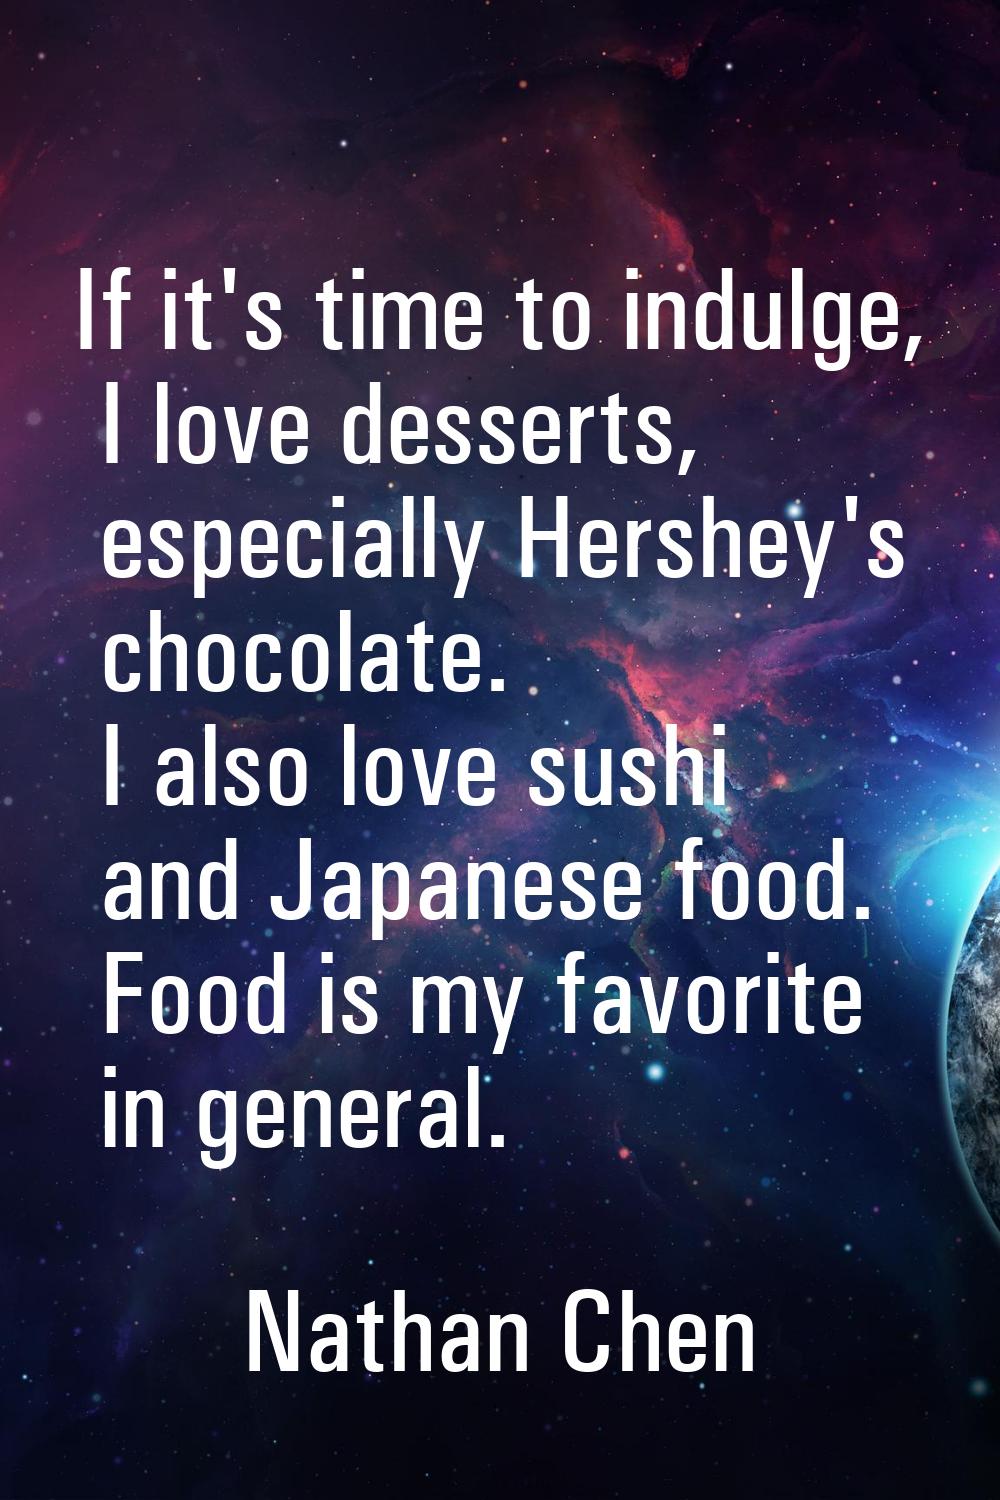 If it's time to indulge, I love desserts, especially Hershey's chocolate. I also love sushi and Jap